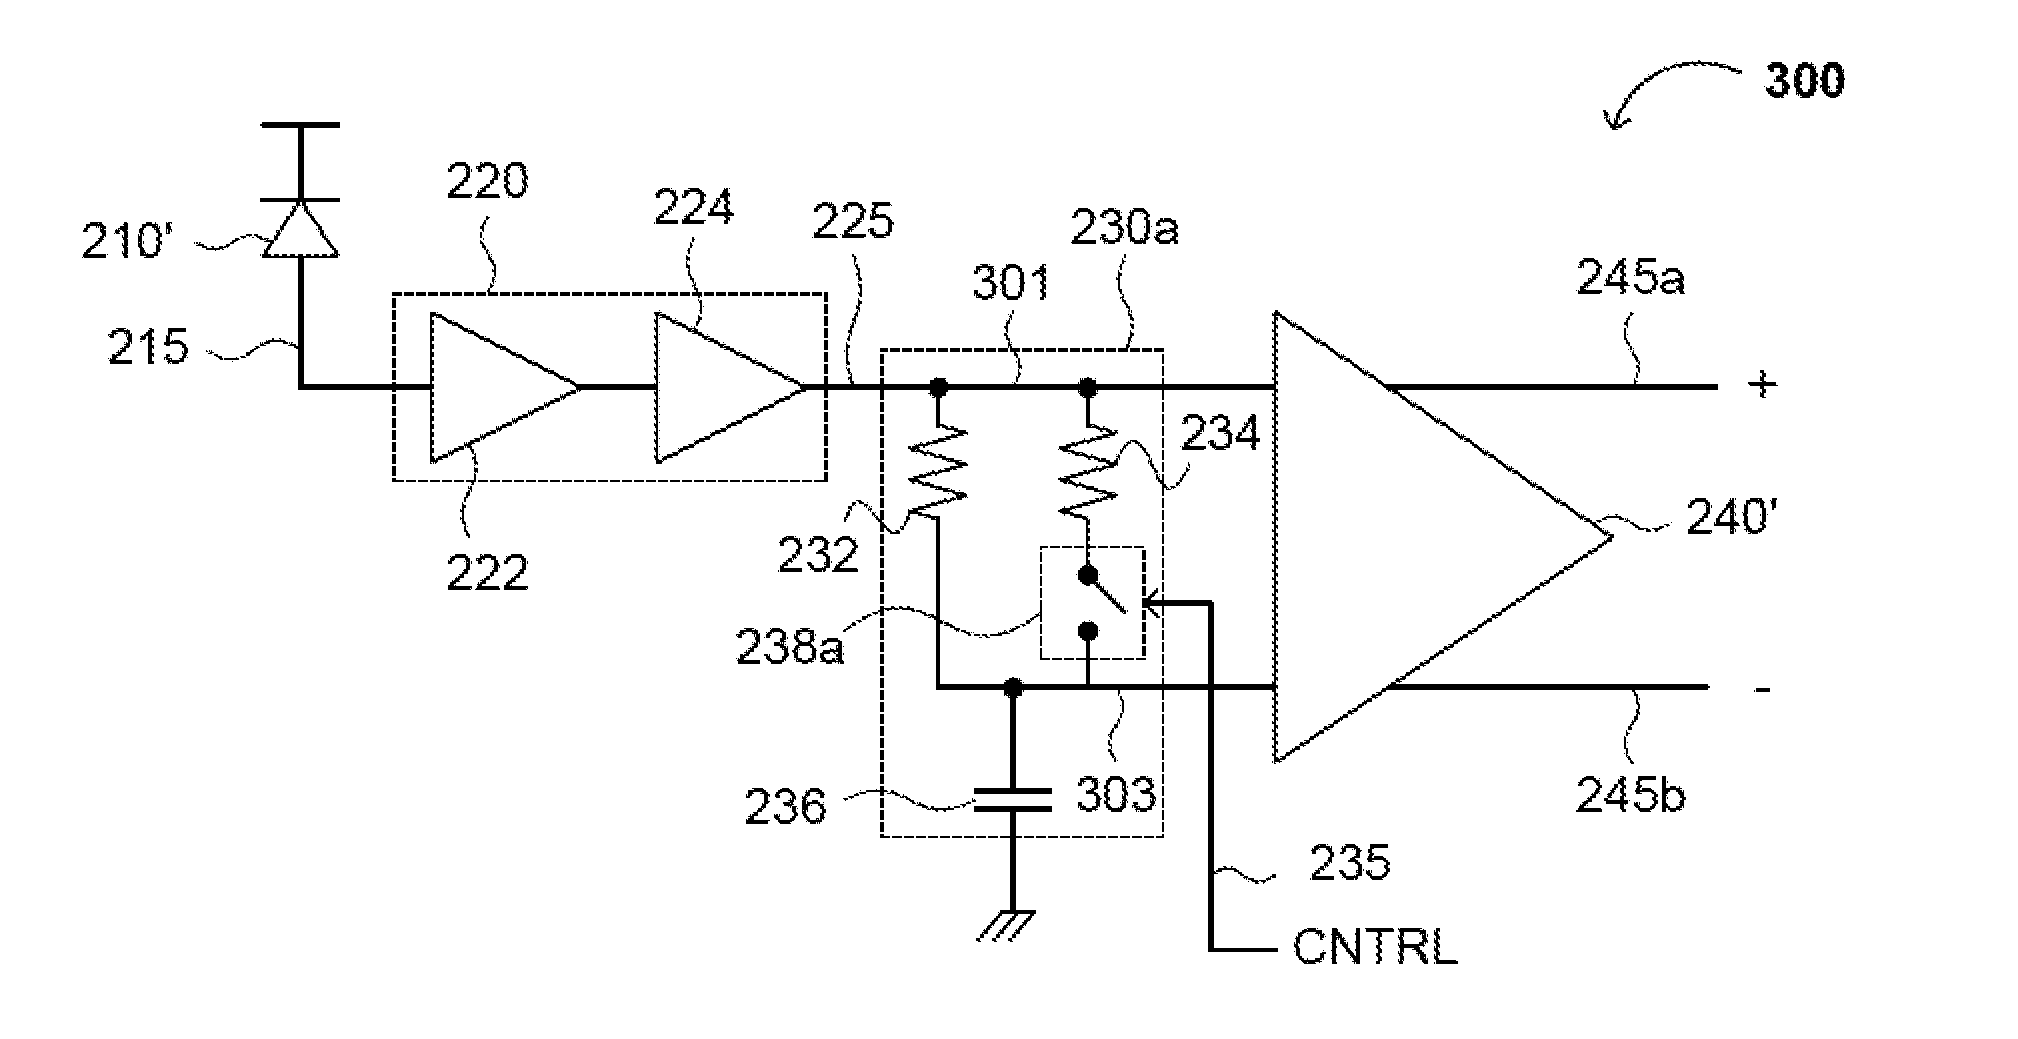 Data Signal Threshold Detection and/or Recovery in Optical and/or Optoelectronic Receivers and/or Transceivers